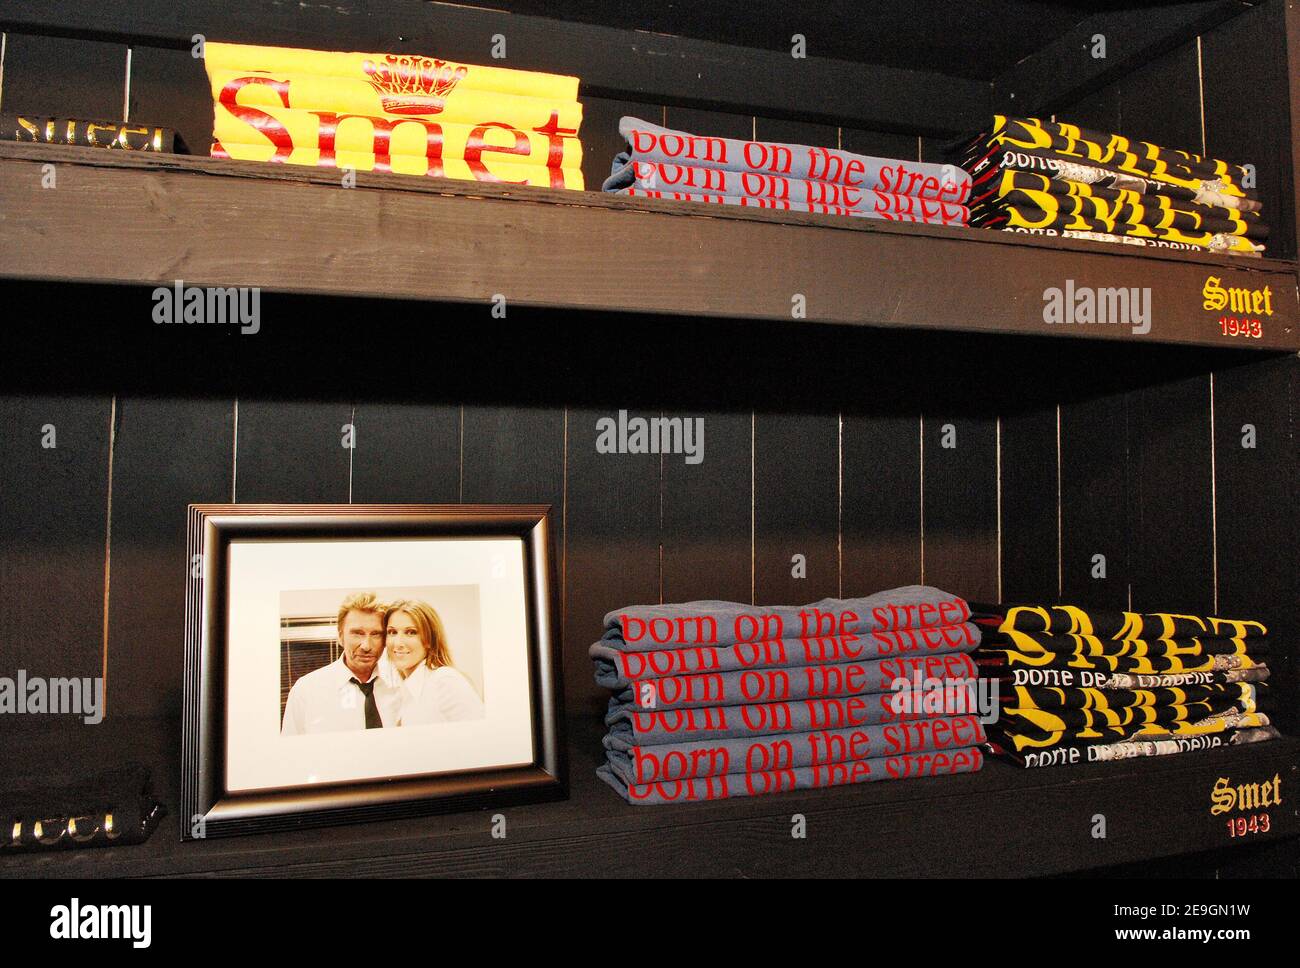 Christian Audigier presents 'Smet ', his latest fashion collection honoring French rock legend Johnny Hallyday in his store of Melrose Avenue in Los Angeles, CA, USA on July 29, 2006. Photo by Lionel Hahn/ABACAPRESS.COM Stock Photo